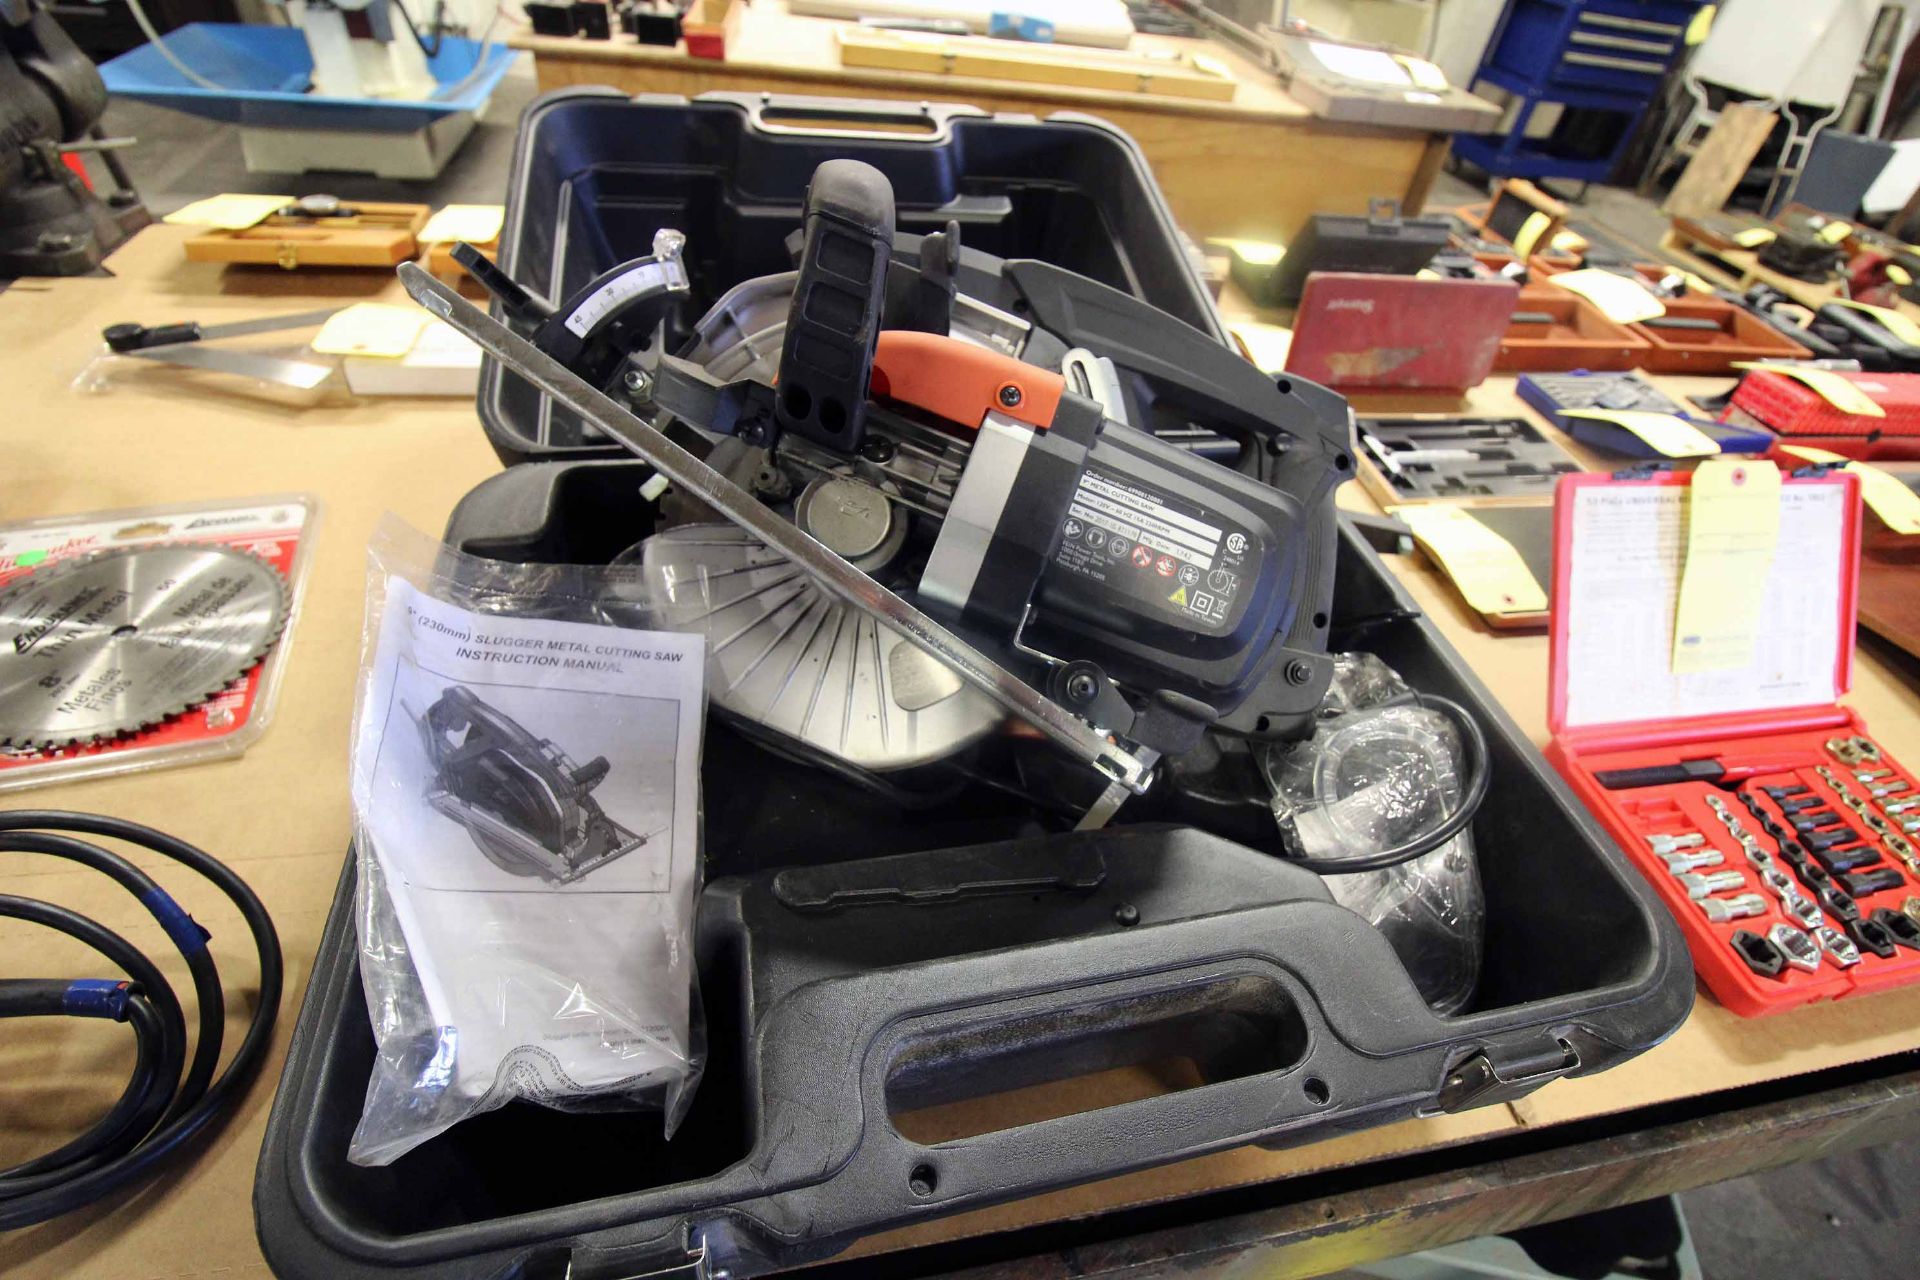 LOT CONSISTING OF: (1) Bosch Colt Mdl. PR20EVS palm router, 1 HP, w/ case & accessories & (1) Mikita - Image 5 of 5